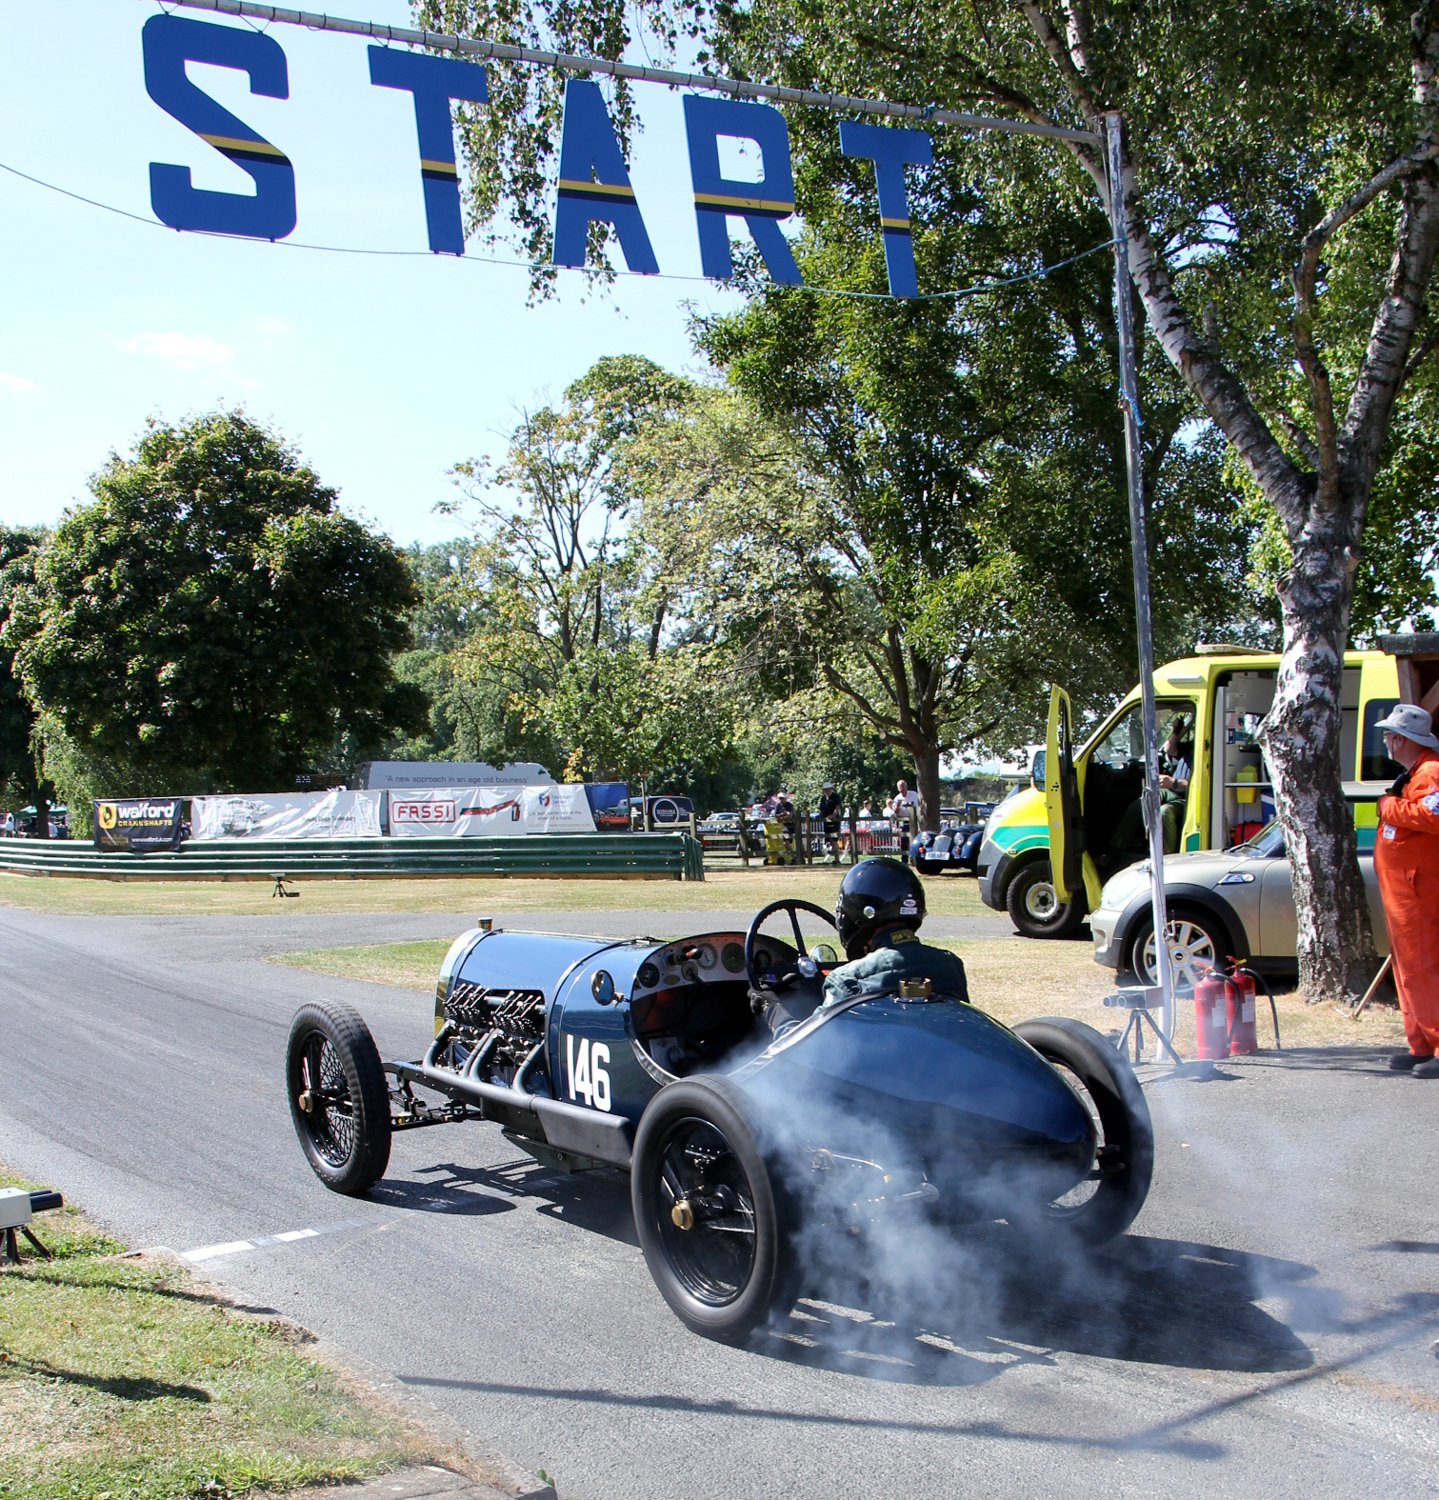 GEOFF SMITH LIGHTS UP THE 1918 PICCARD PICTET STURTEVANT AERO SPECIALAT START. Picasa